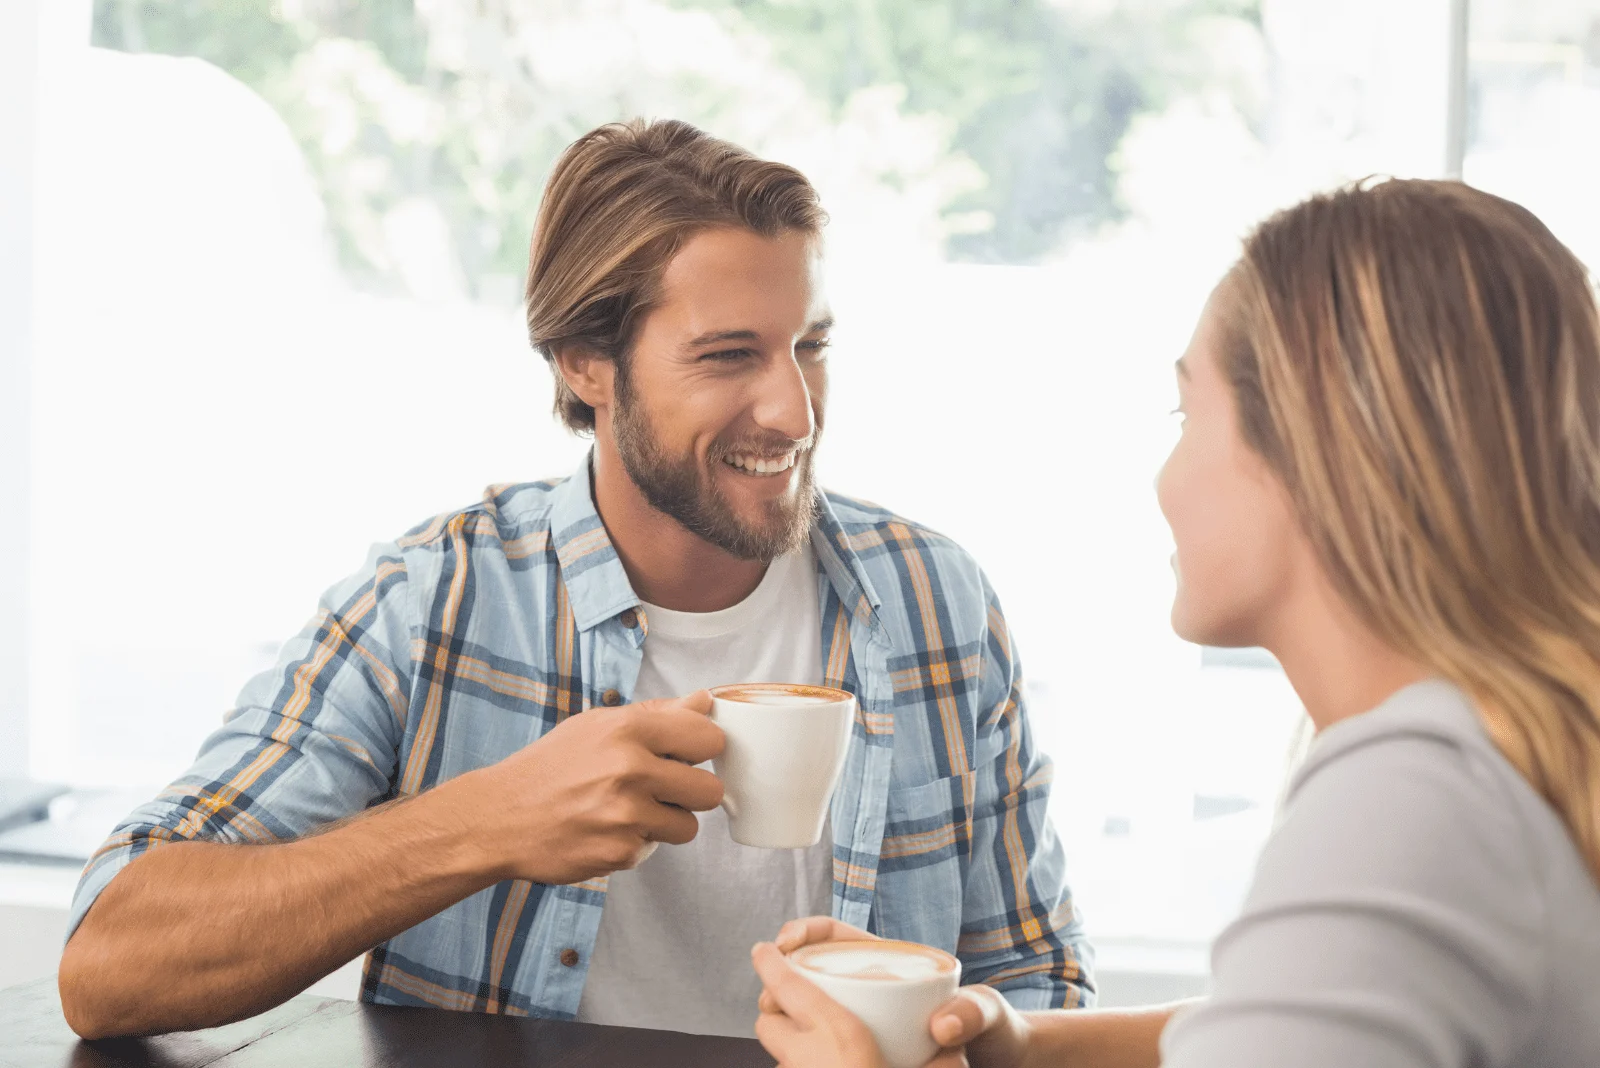 A smiling man is talking to a woman over coffee